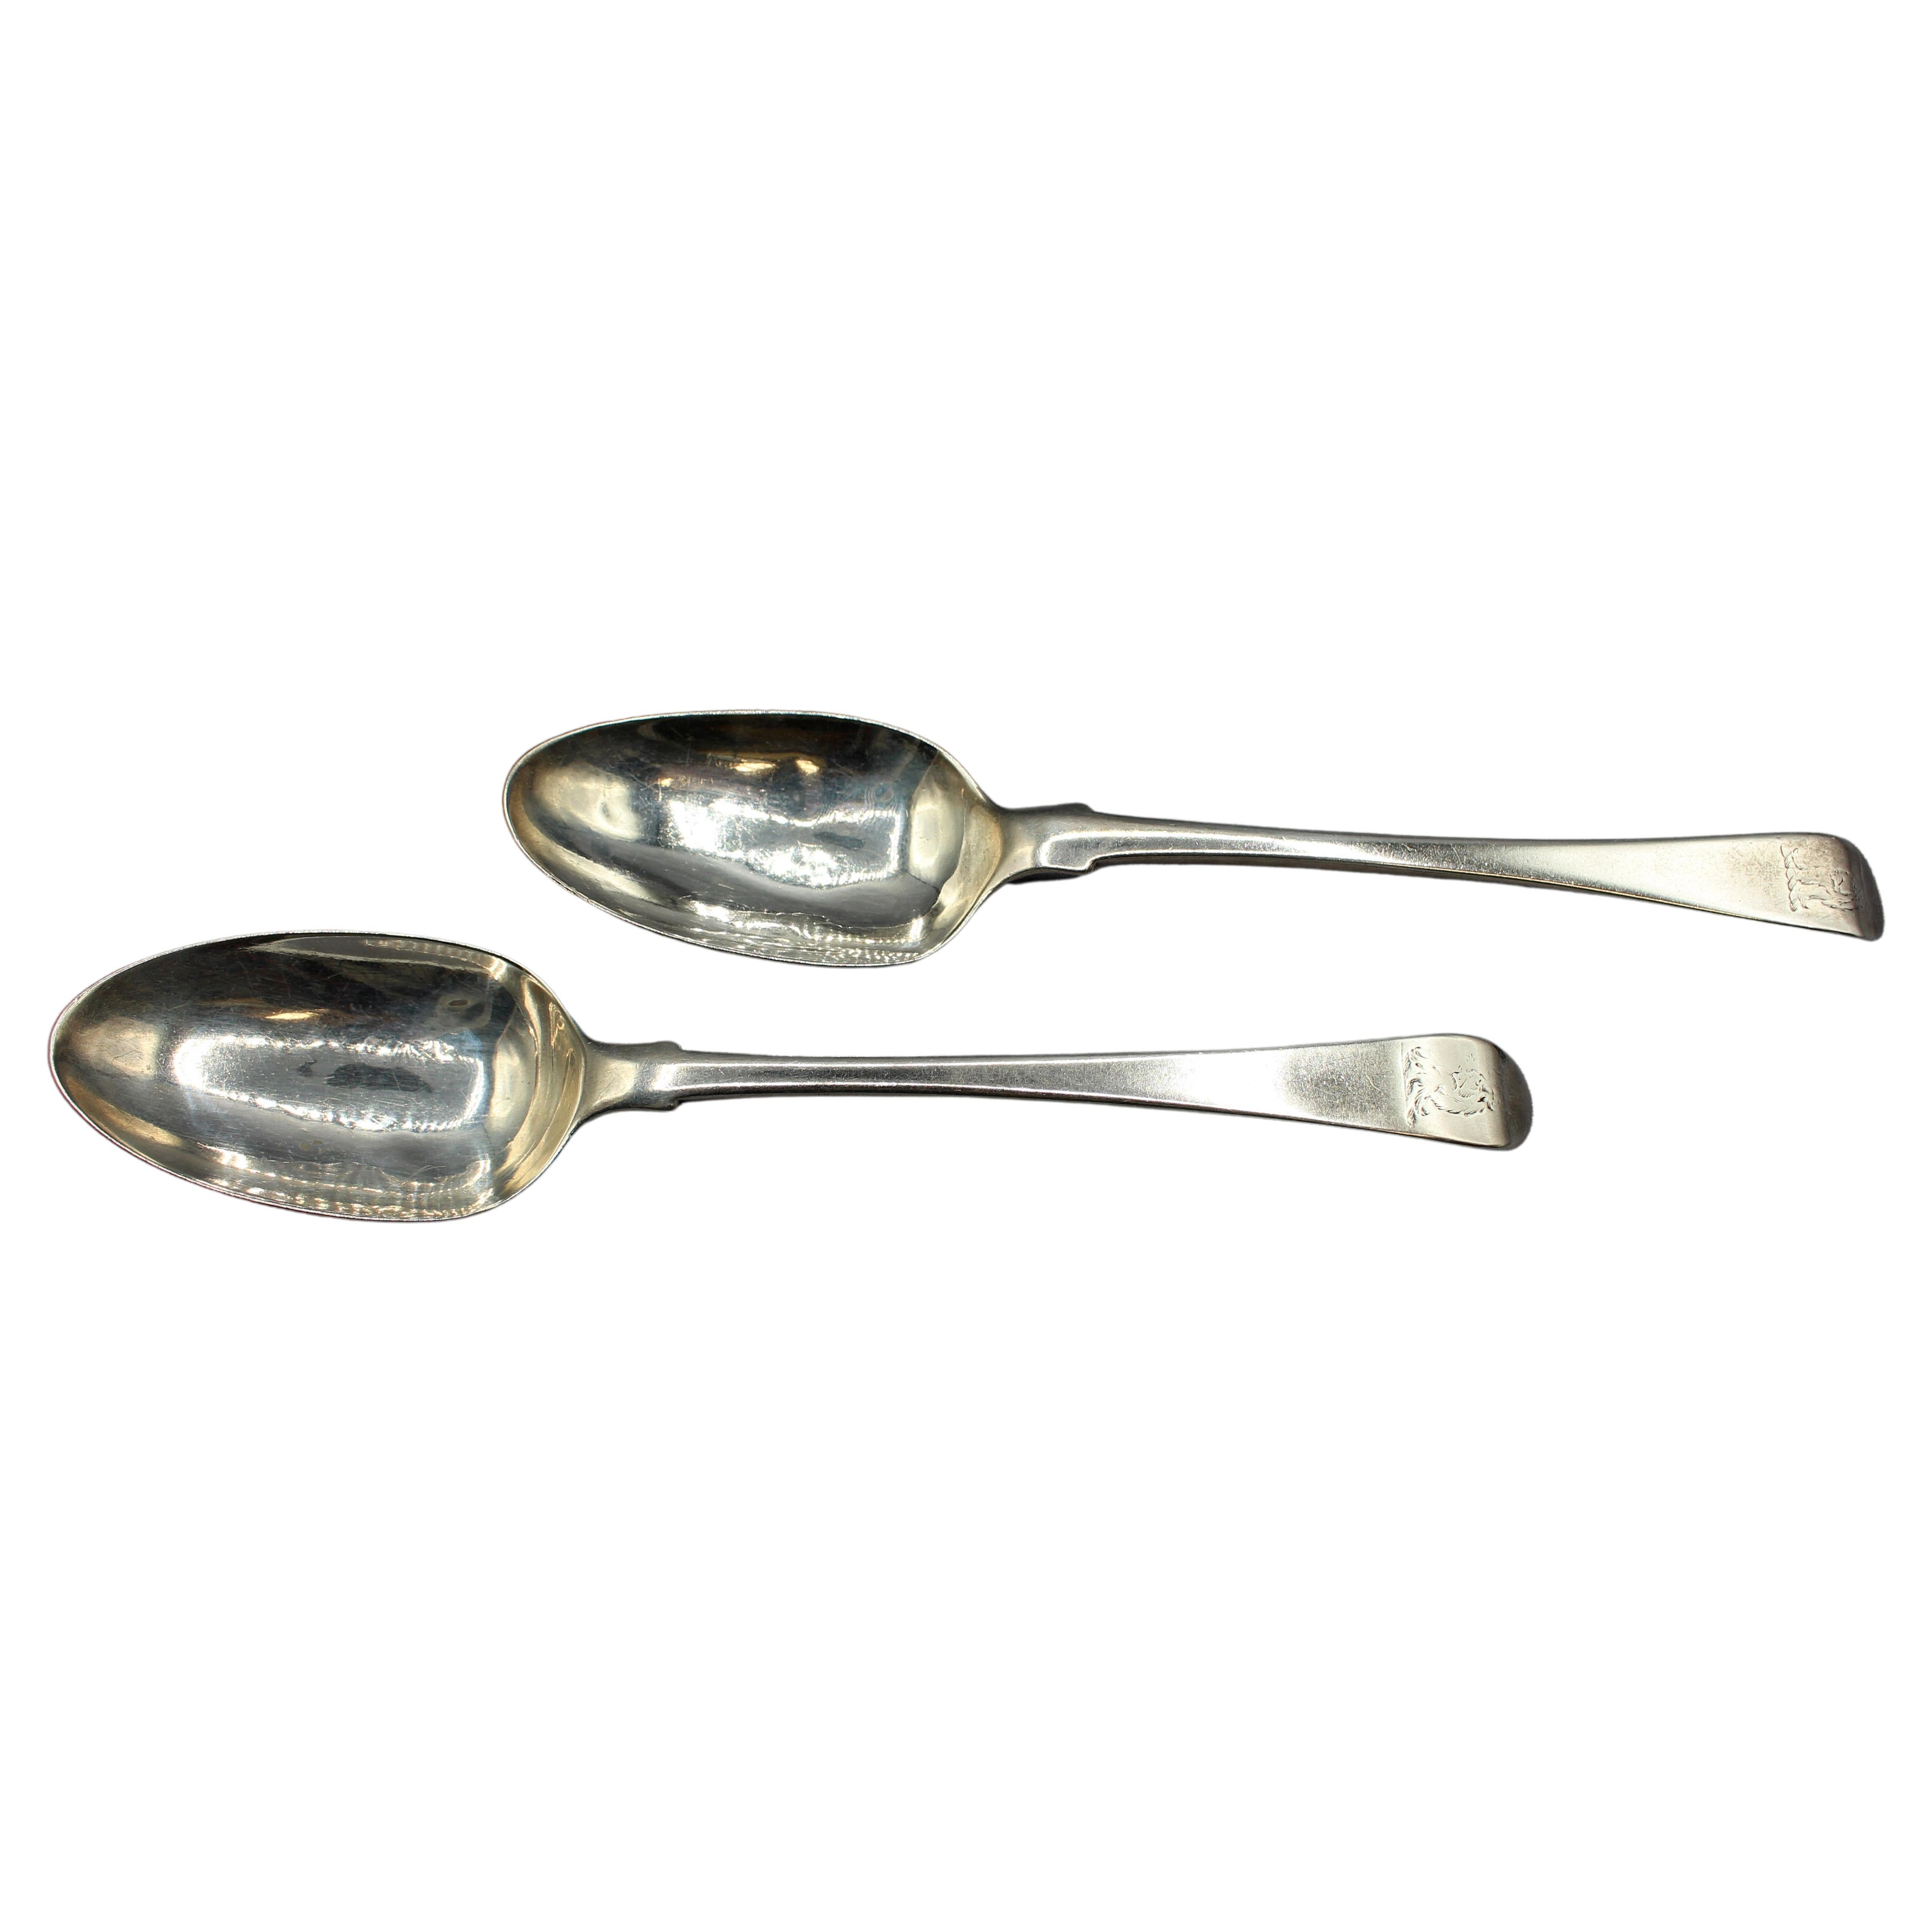 1740s & 1777 Matched Pair of Sterling Silver Tablespoons For Sale